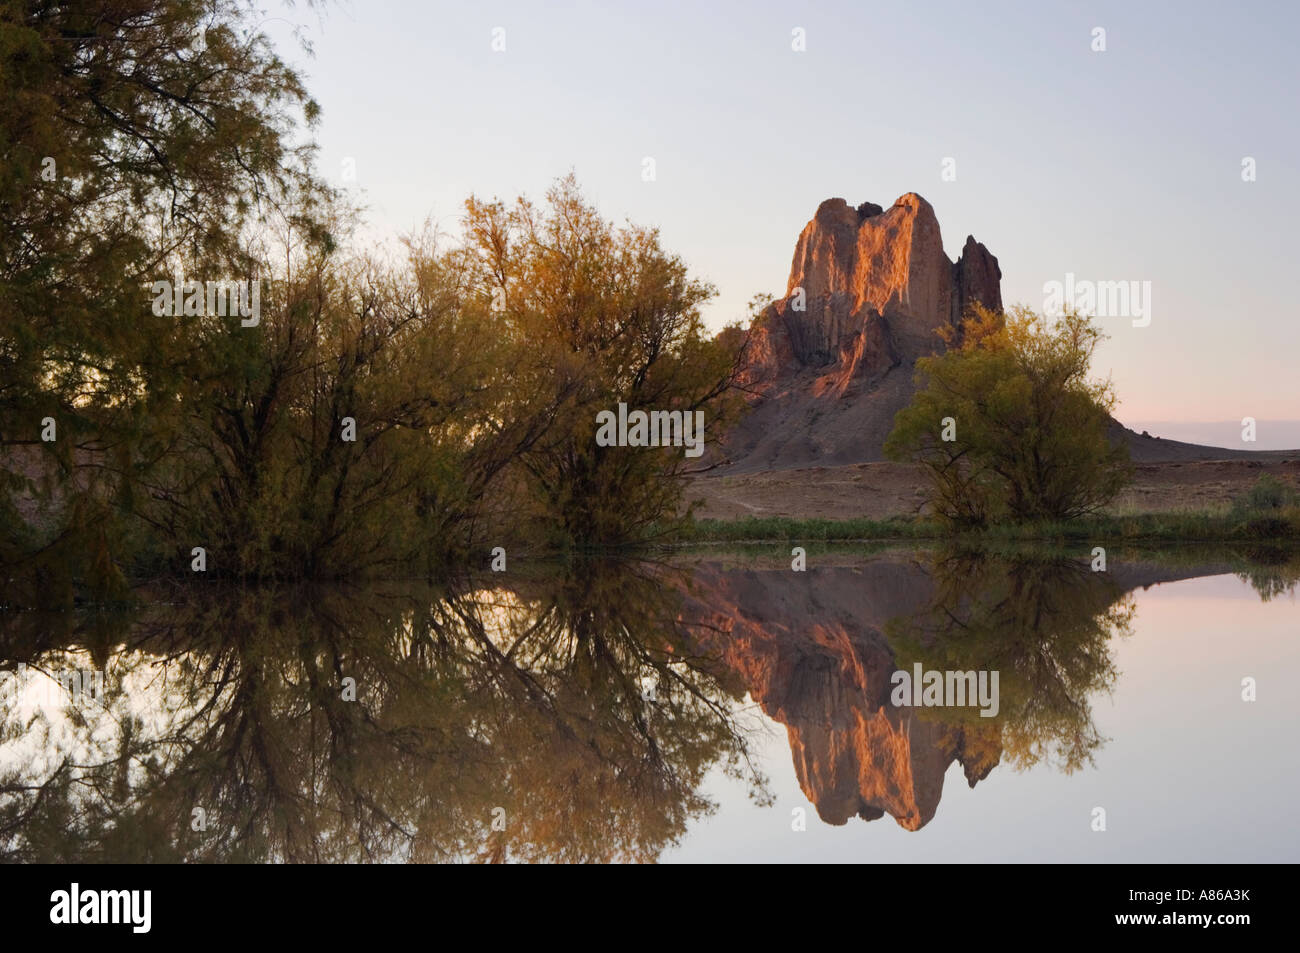 Rocks reflecting in pond with Salt Cedars at sunrise Shiprock Navajo Indian Reserve New Mexico USA September 2006 Stock Photo